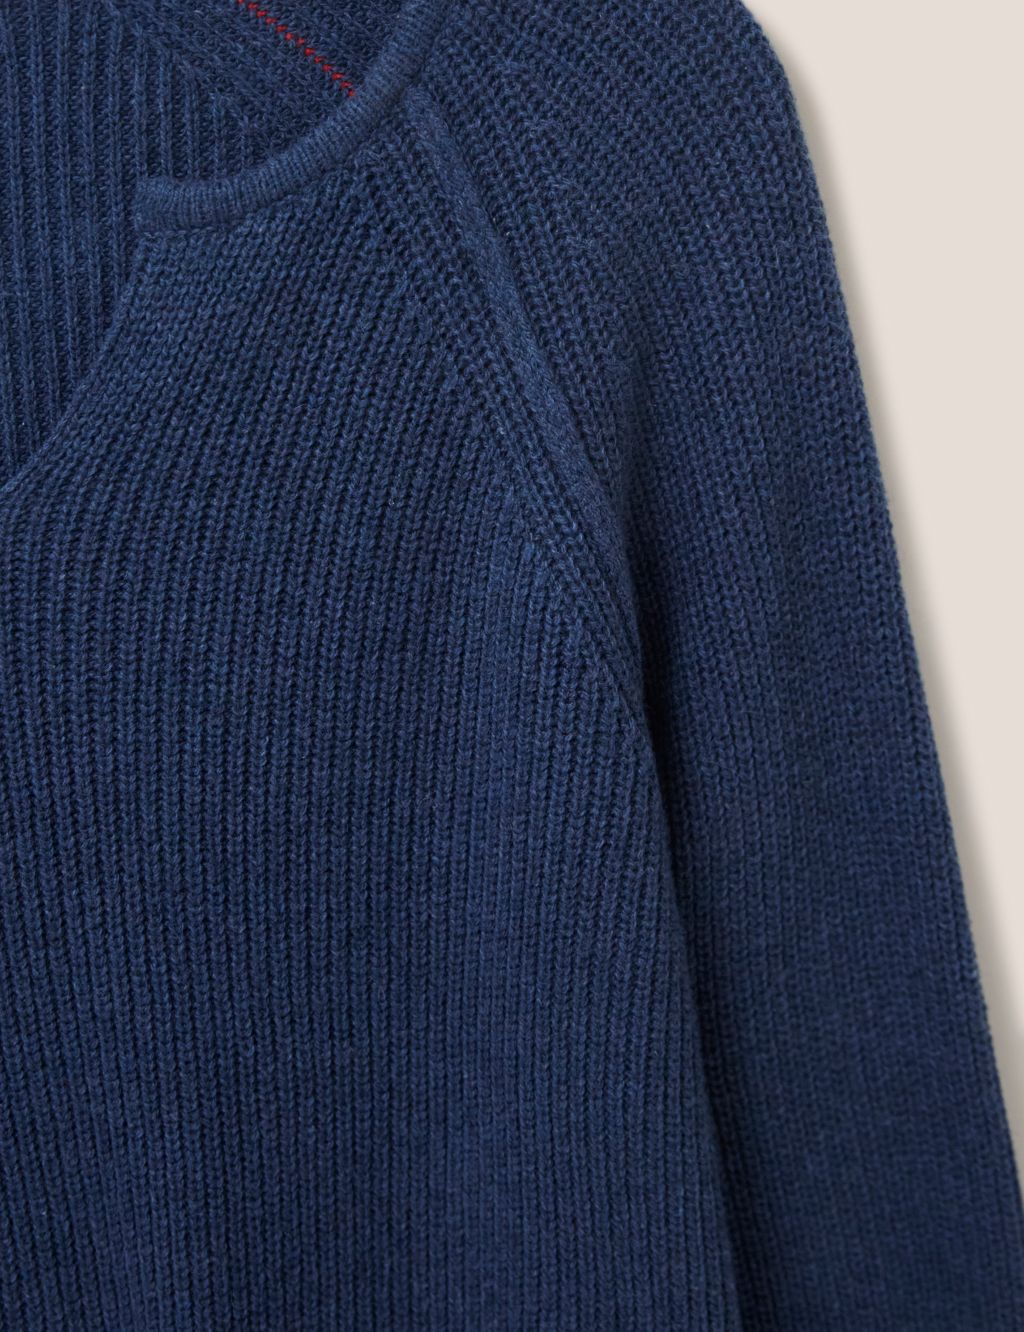 Wool Rich Ribbed Notch Neck Jumper image 6